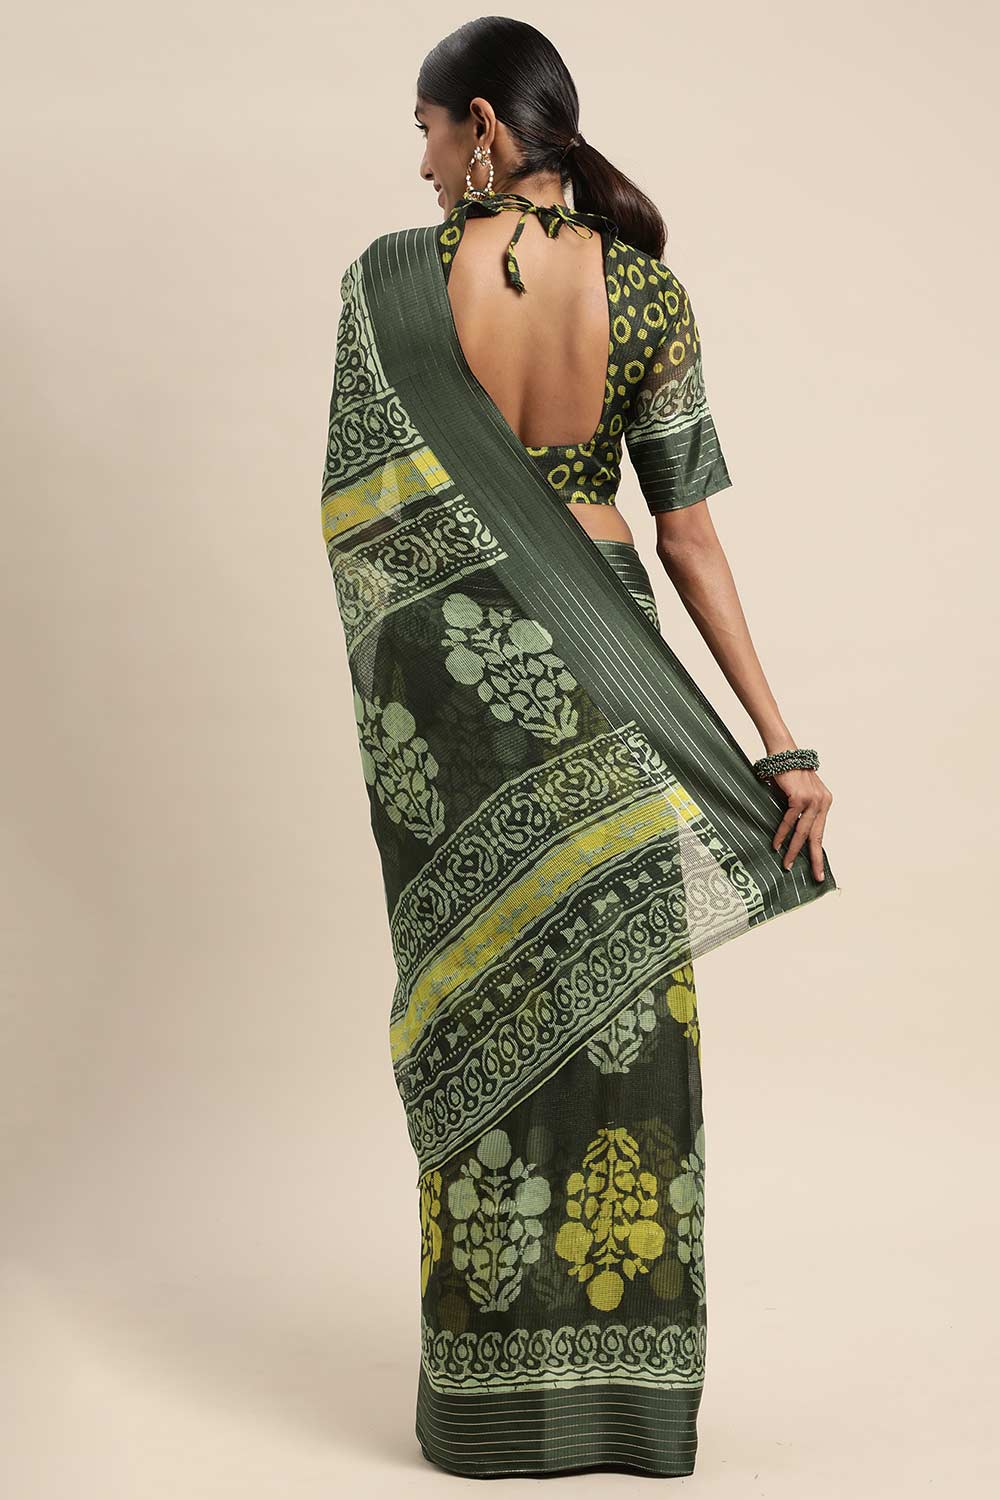 Shop Lavina Olive Brasso Bagh Block Print One Minute Saree at best offer at our  Store - One Minute Saree